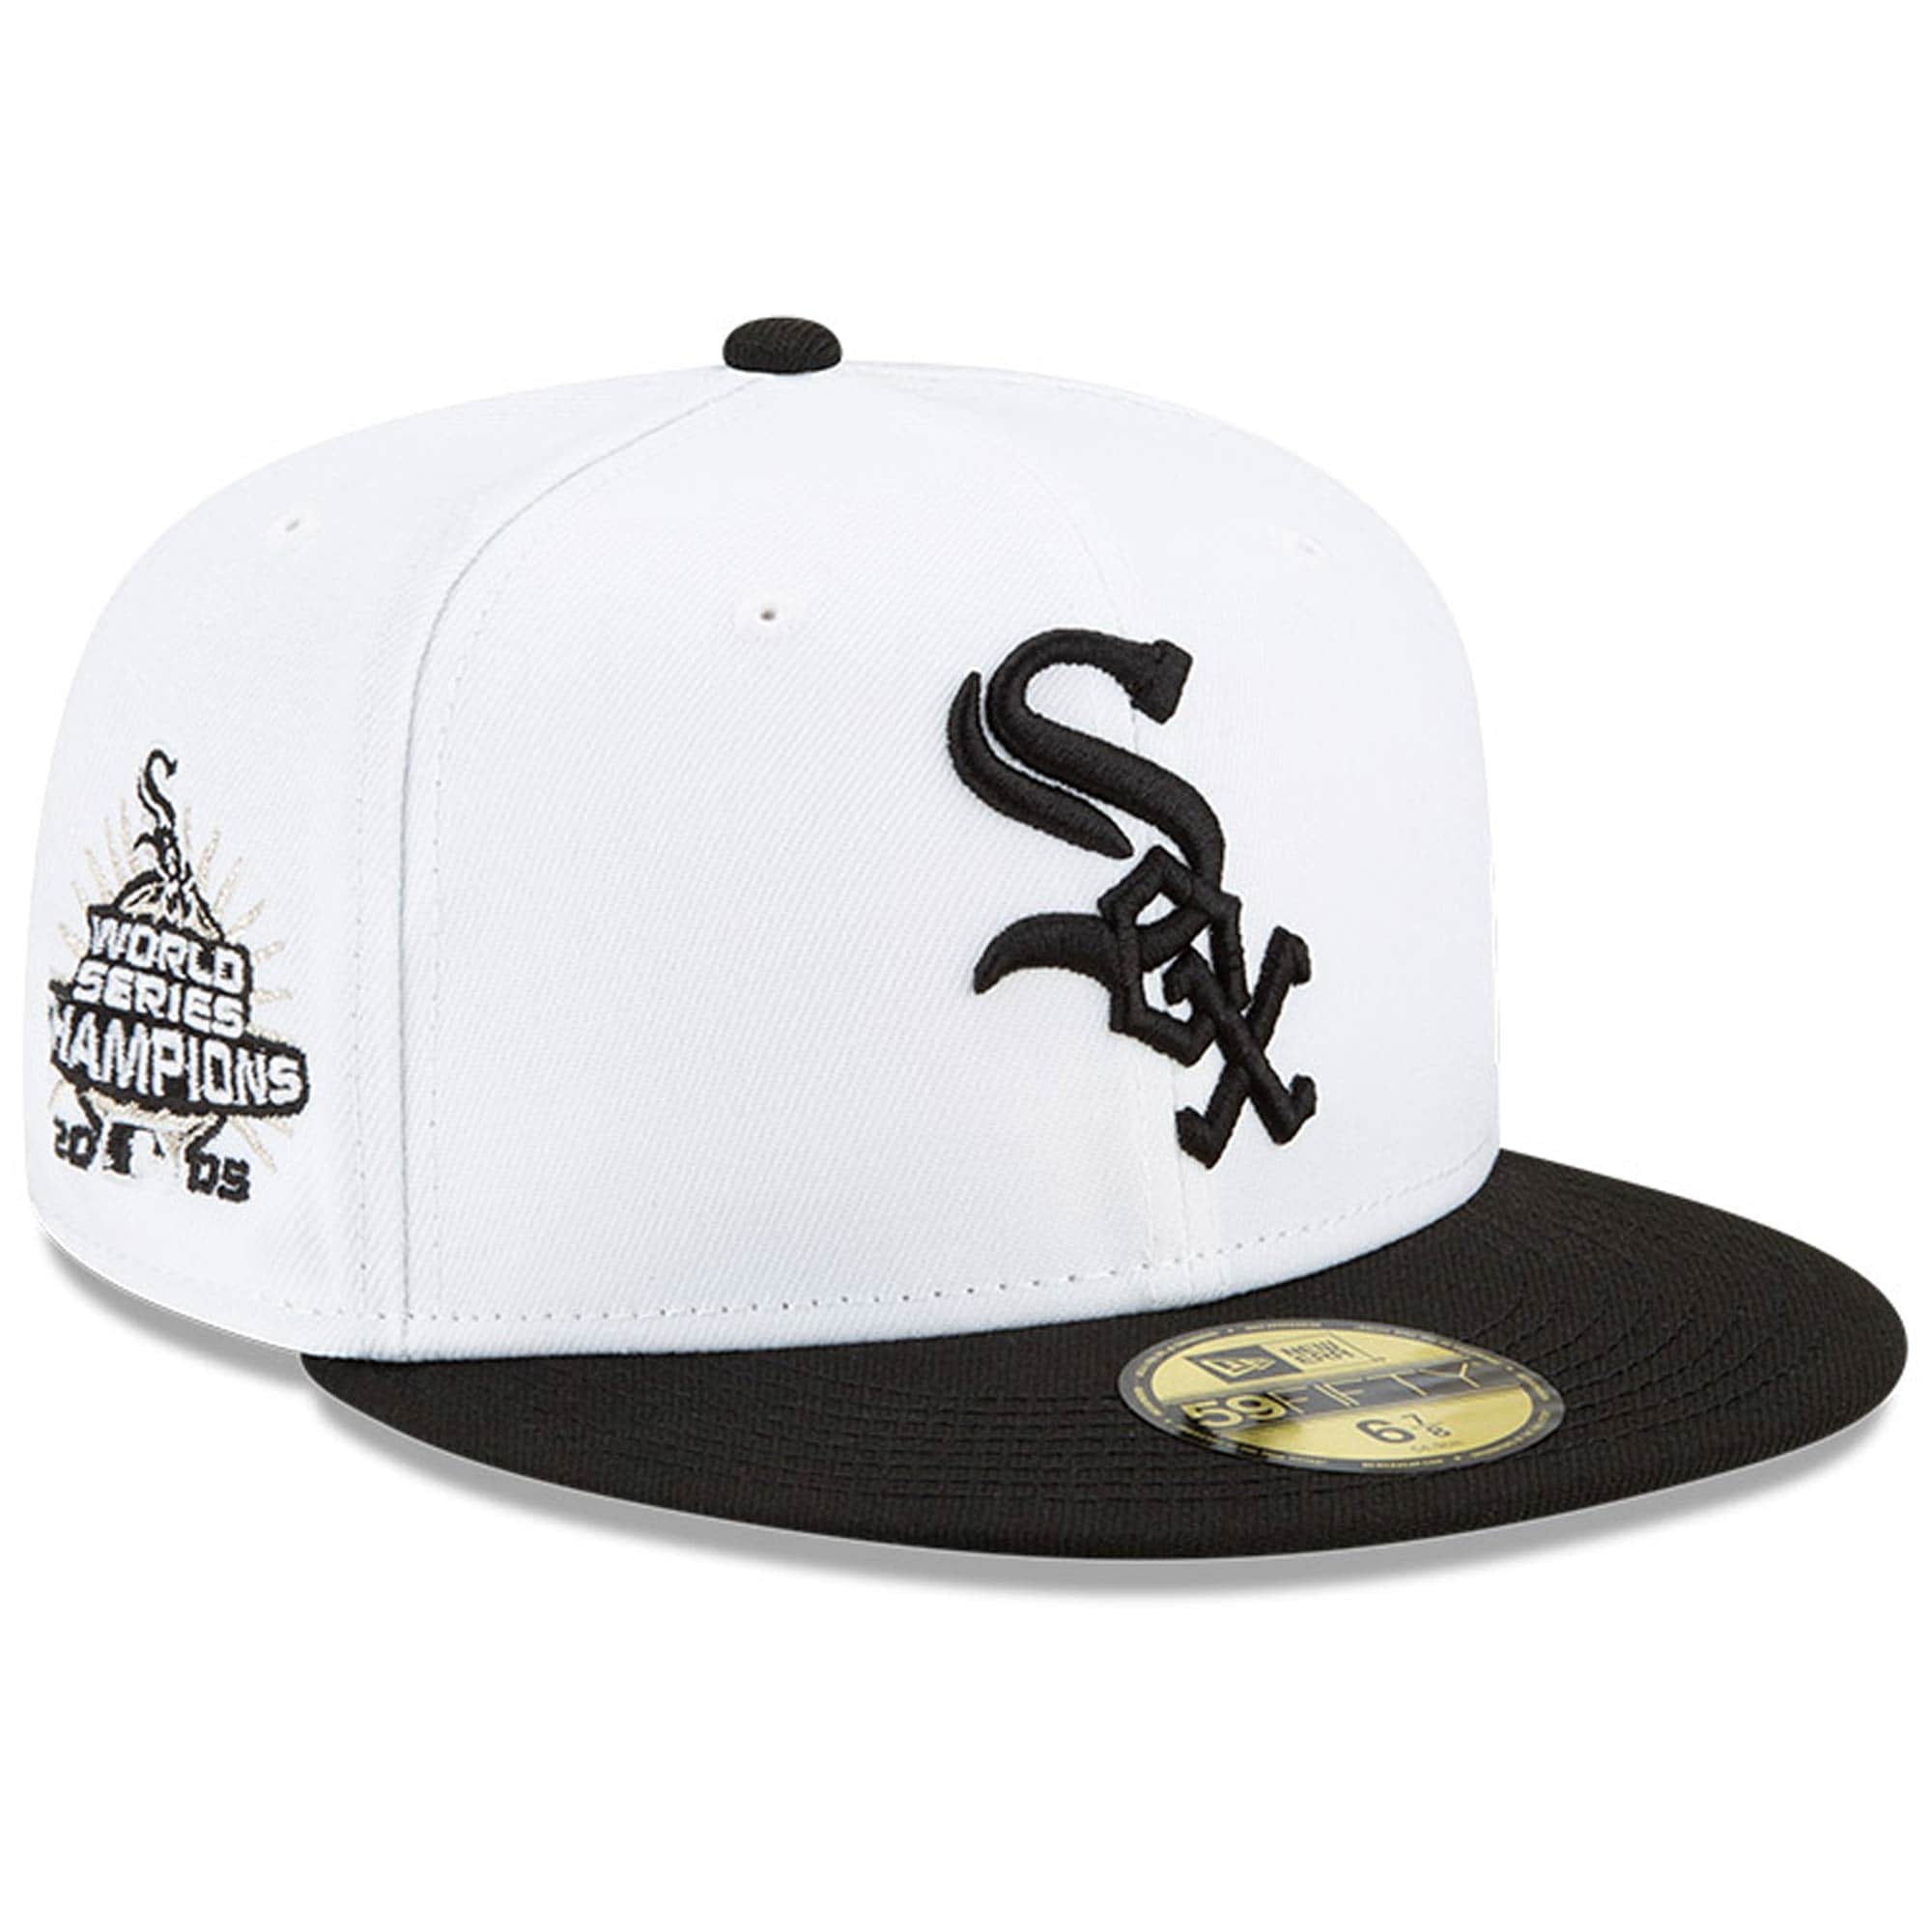 New Era Mens Chicago White Sox Wool 59Fifty Fitted Hat Black/White Adult 